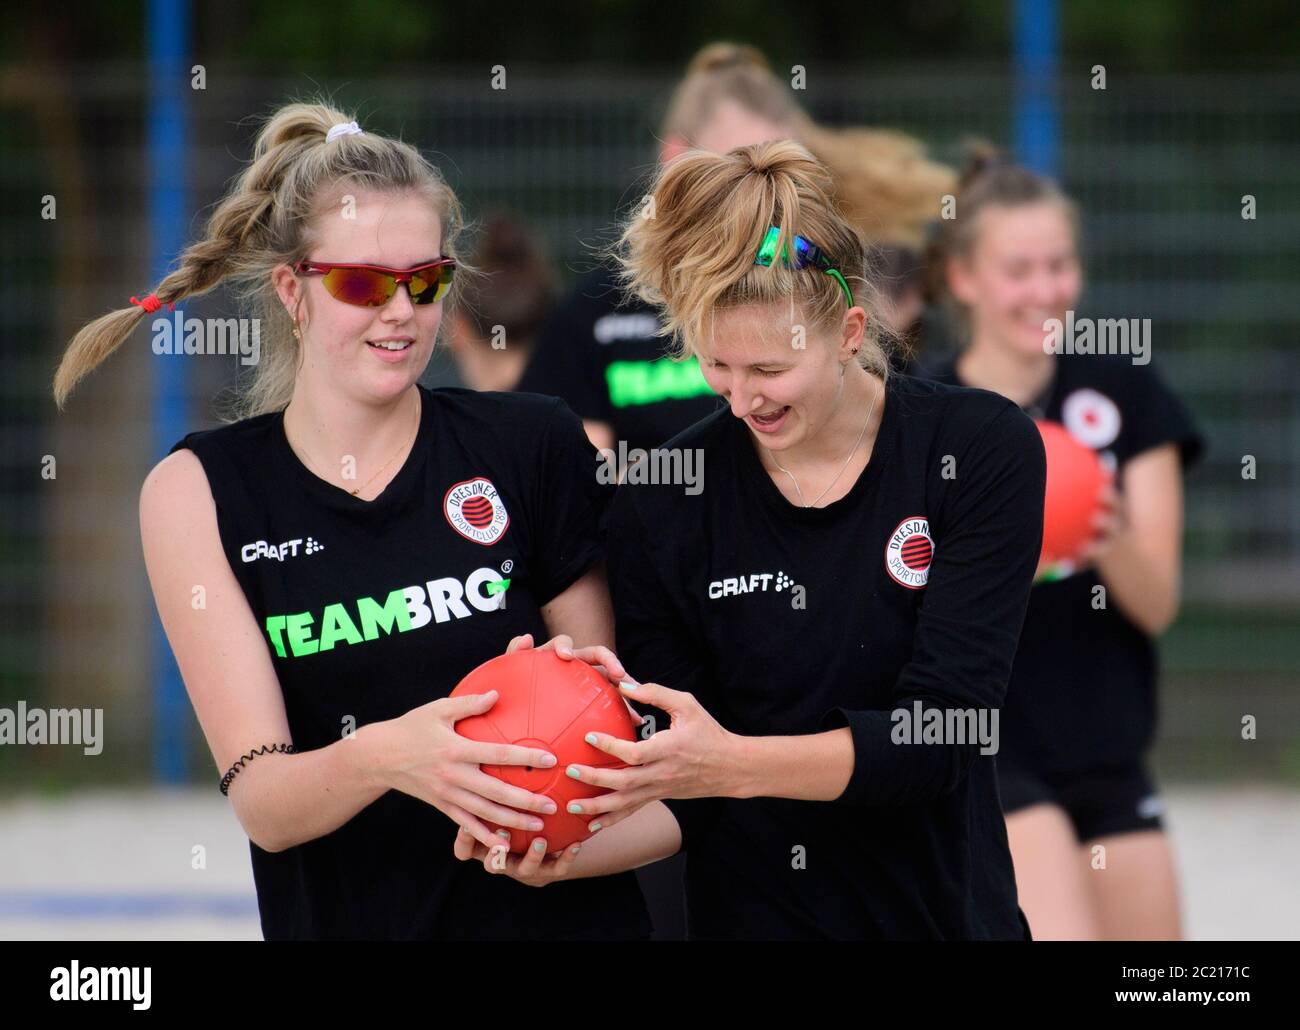 Dresden, Germany. 16th June, 2020. Emma Cyris (l) and Sarah Straube, players at the women's volleyball Bundesliga club Dresdner SC, are training with a medicine ball during an athletics session on the beach volleyball court. Credit: Robert Michael/dpa-Zentralbild/dpa/Alamy Live News Stock Photo